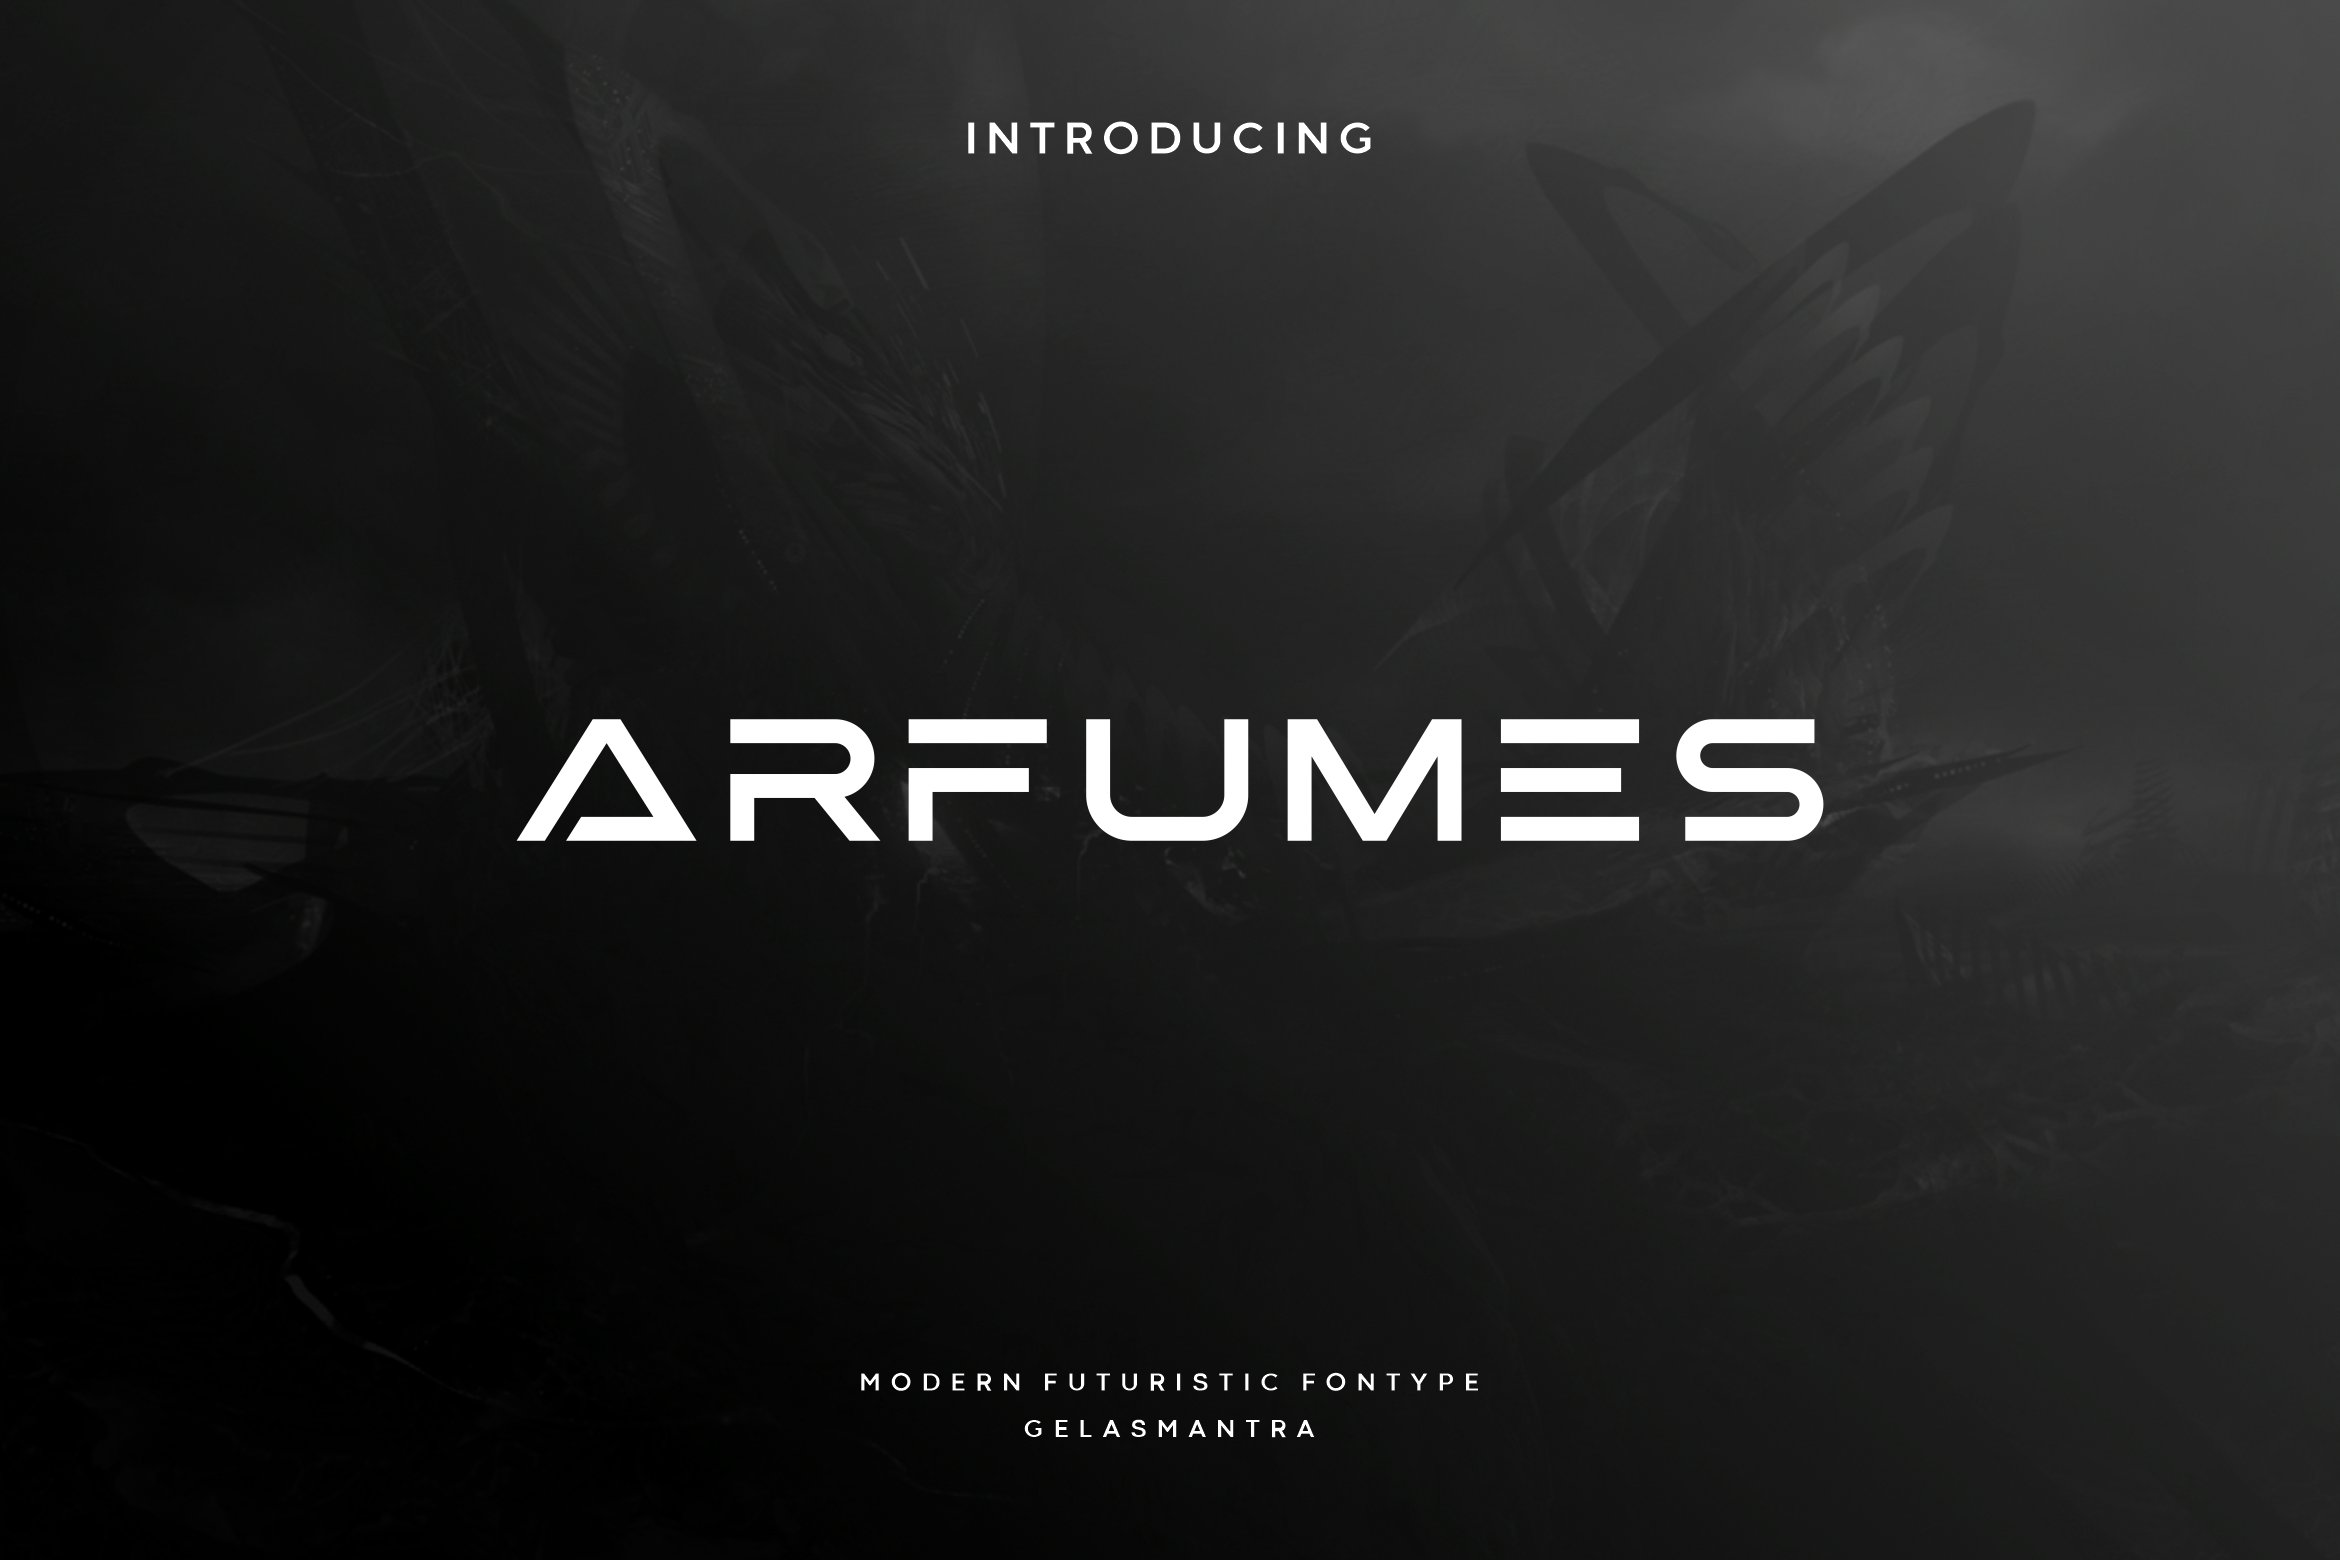 Arfumes cover image.